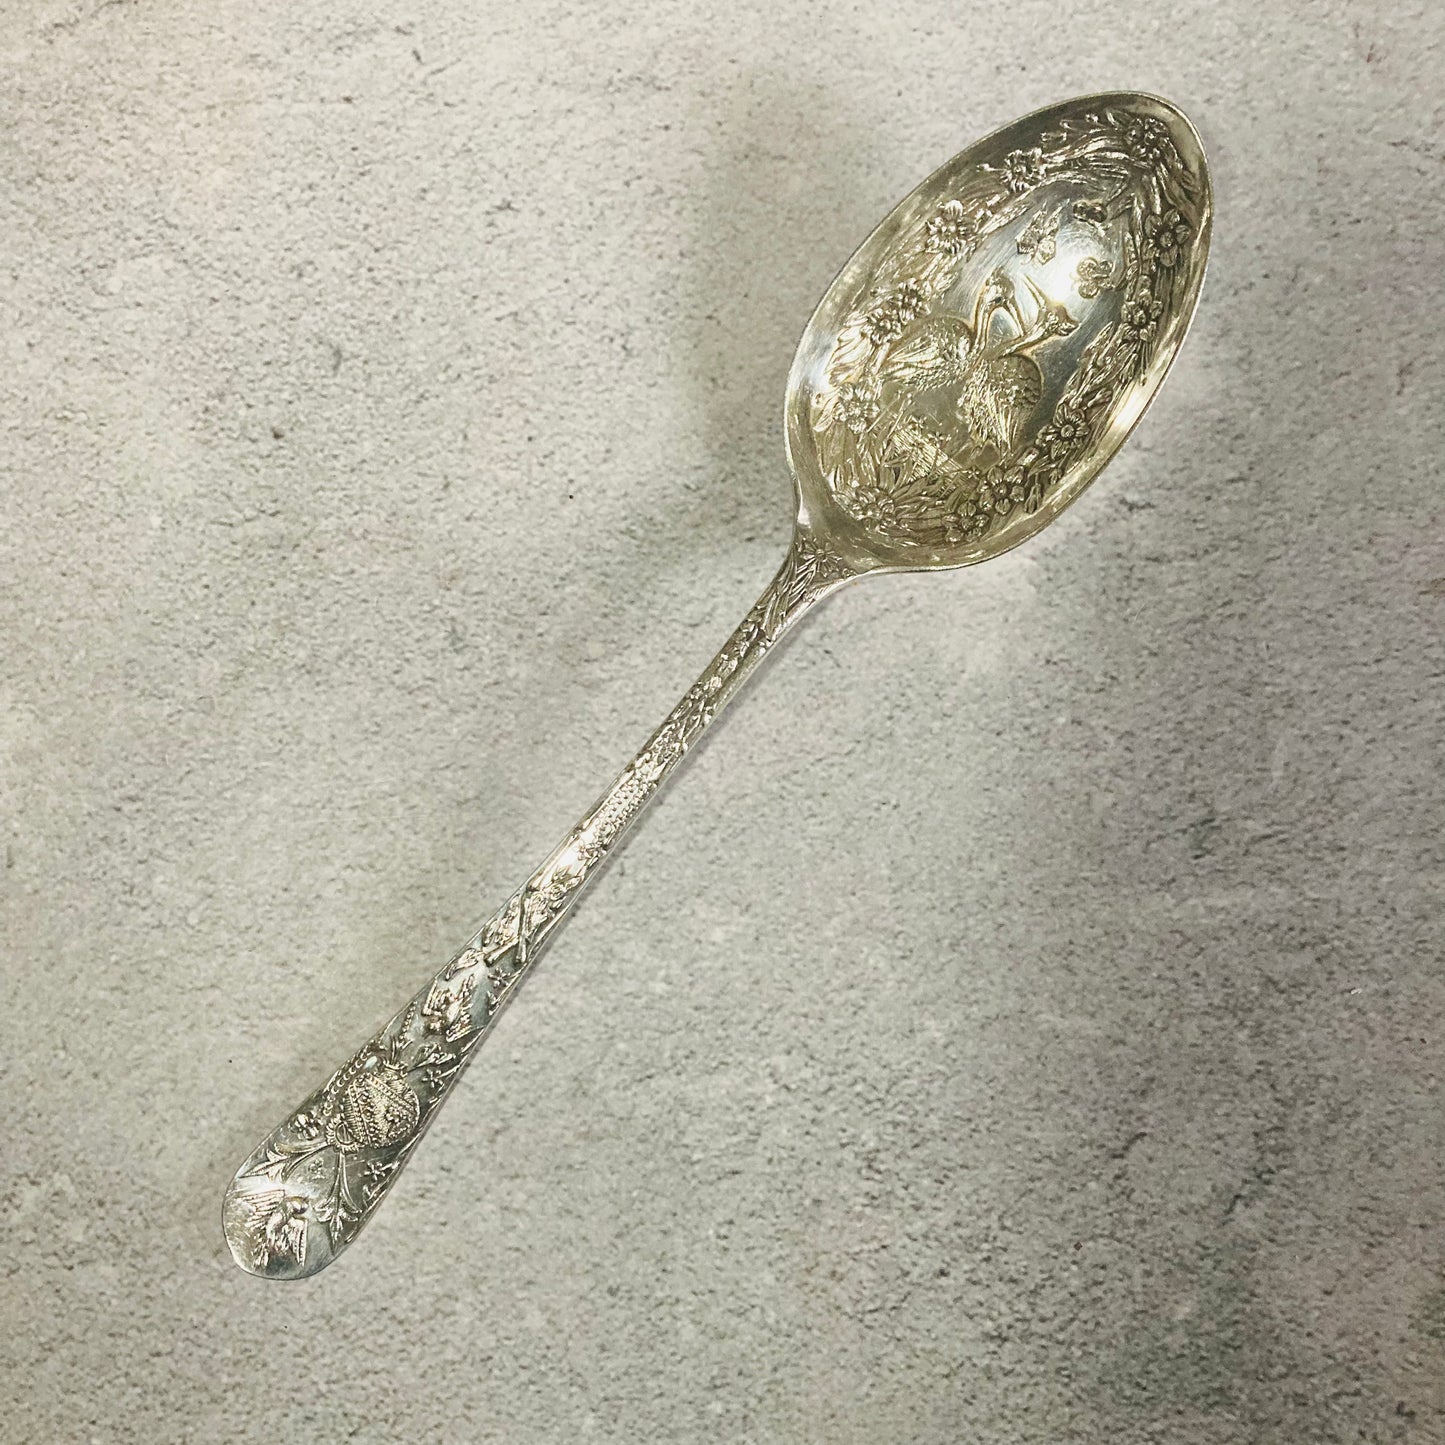 Antique Silver Plate Berry Spoons | Serving Spoon